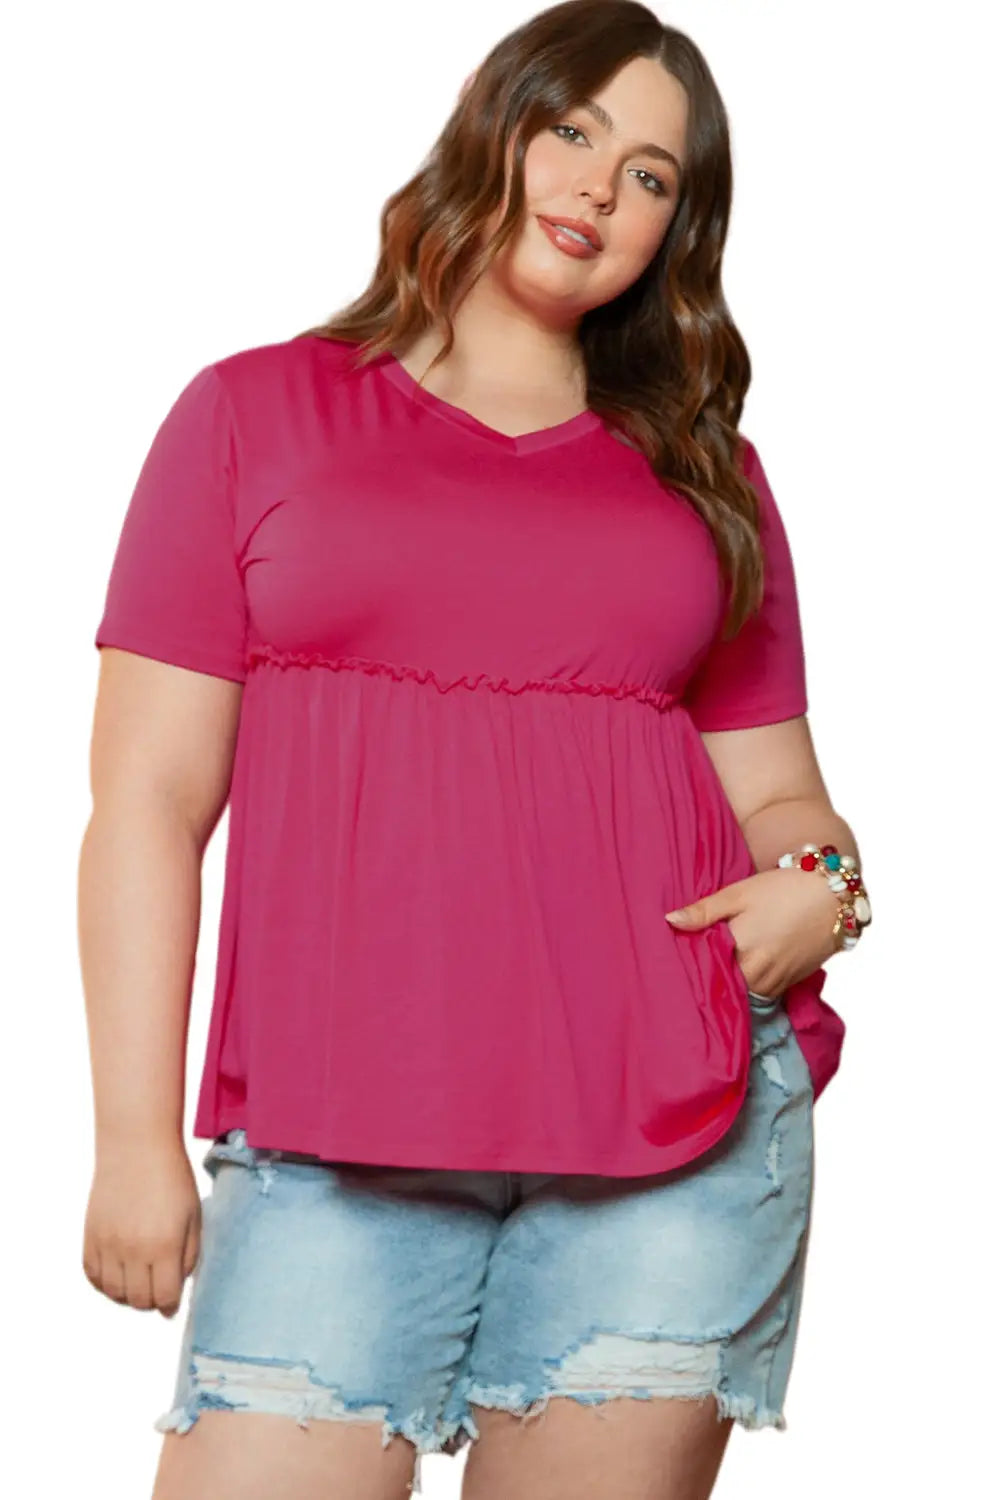 Rose red solid short sleeve flowy plus size top